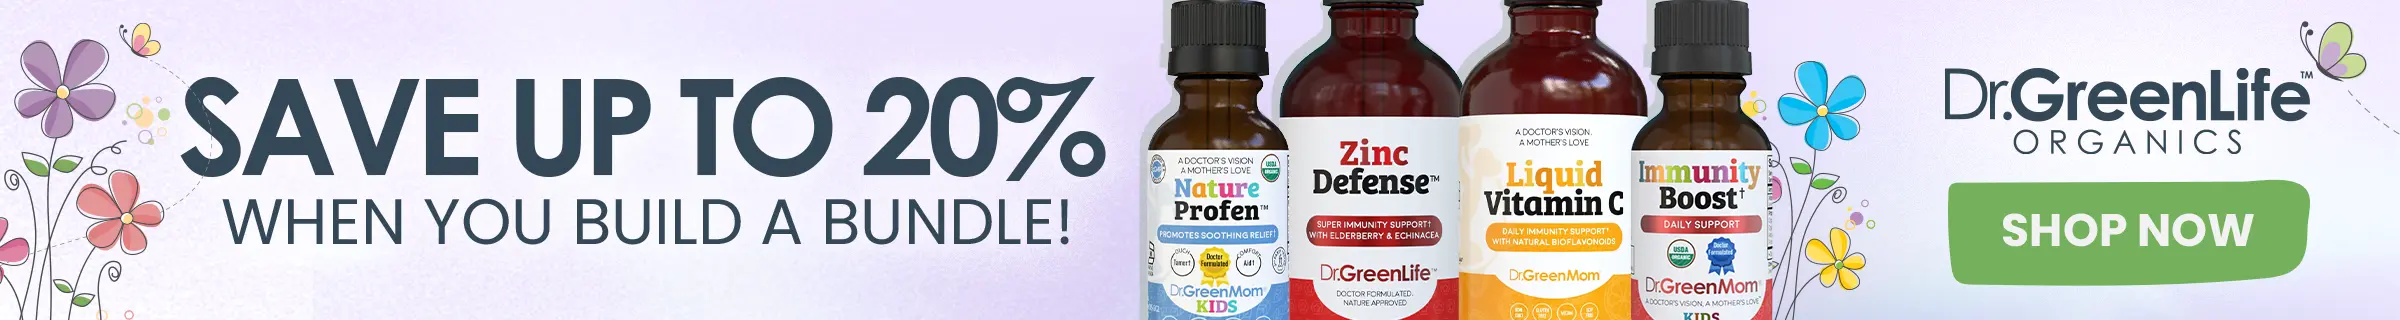 Dr Green Life Organics™ - Save up to 20% when you build a bundle